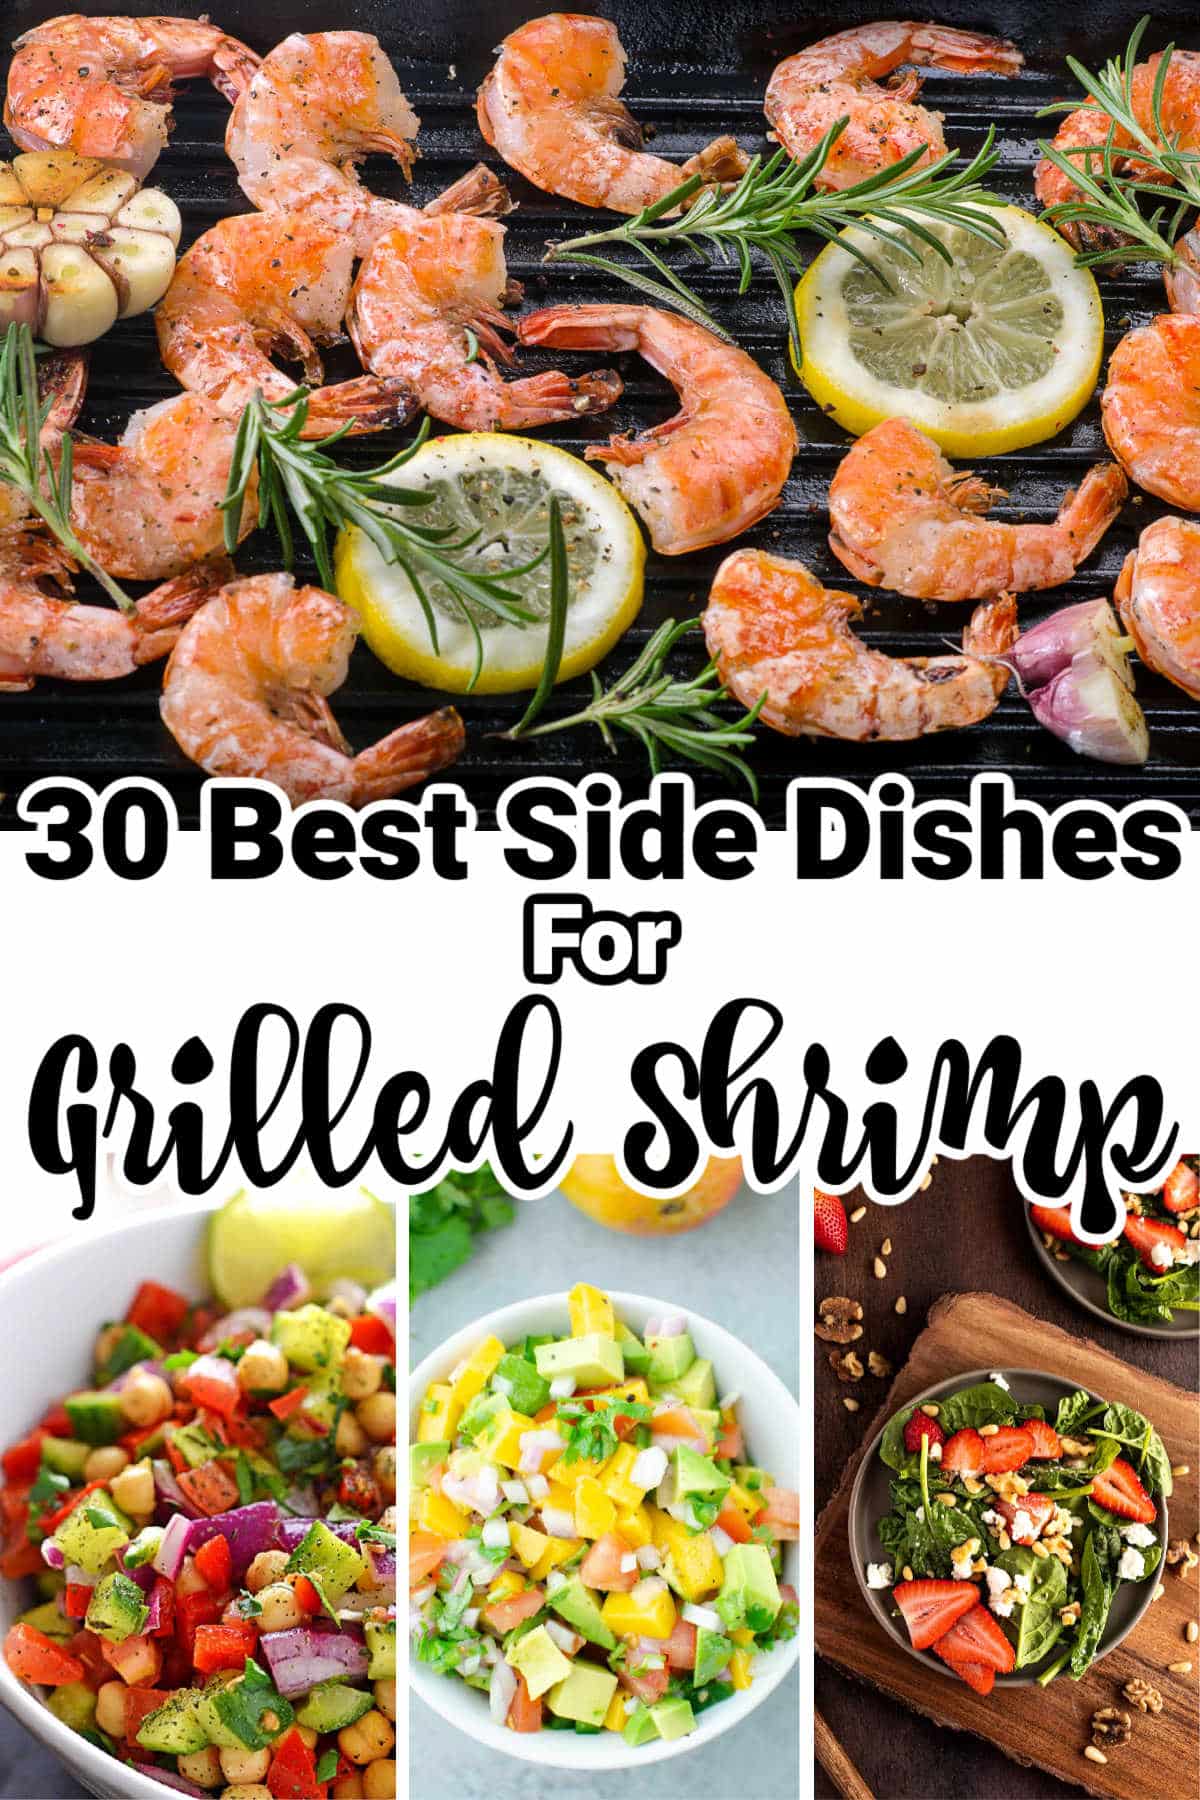 one image on top with is of grilled shrimp then three images below of sides dishes that can are served with grilled shrimp